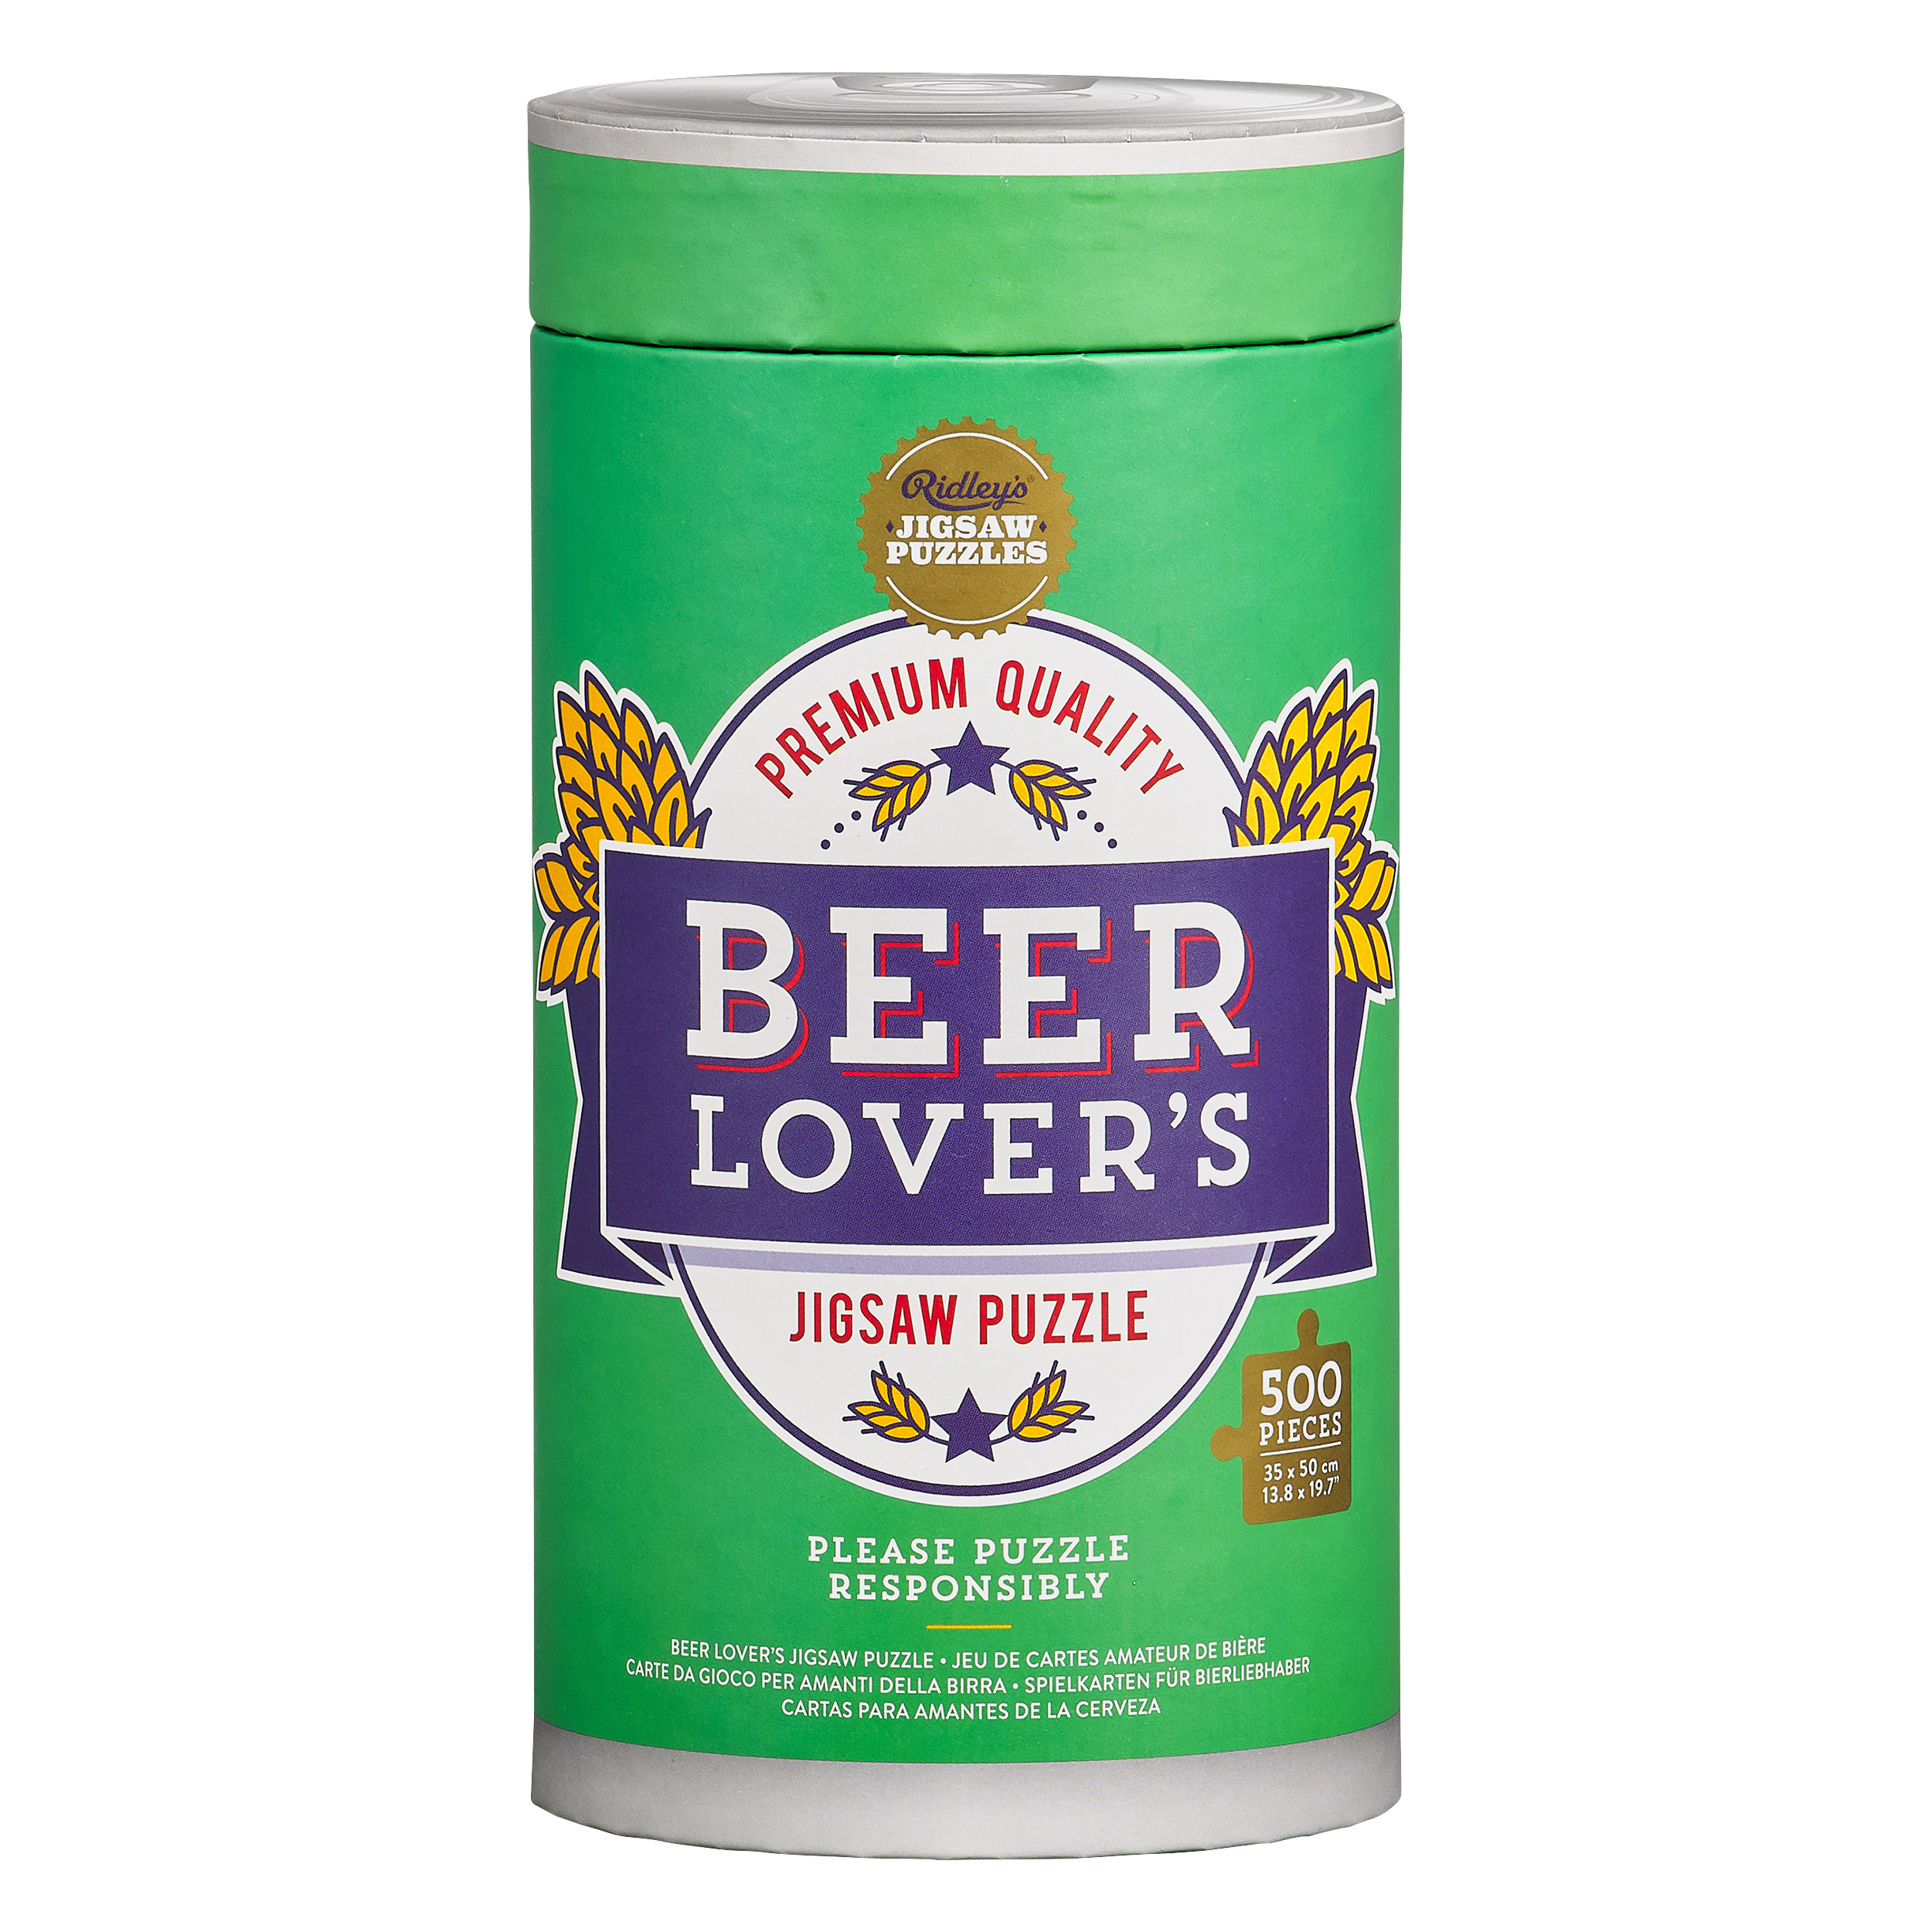 Beer Lover's 500 Piece Jigsaw Puzzle (Other) - image 2 of 3